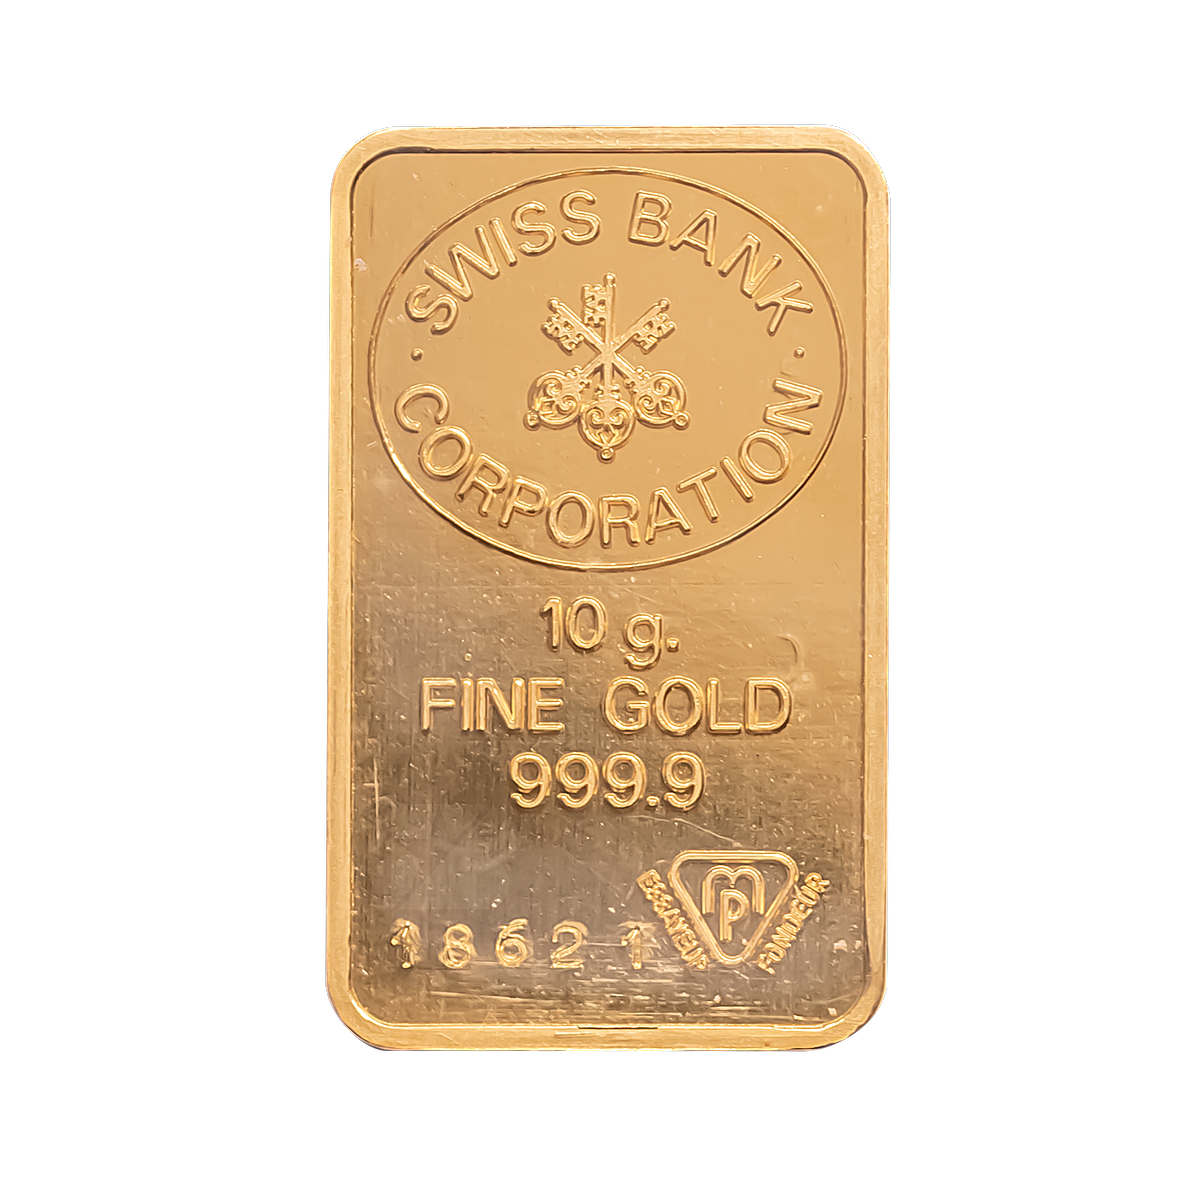 Swiss Bank Corporation Gold Bar - Circulated in good condition - 10 g